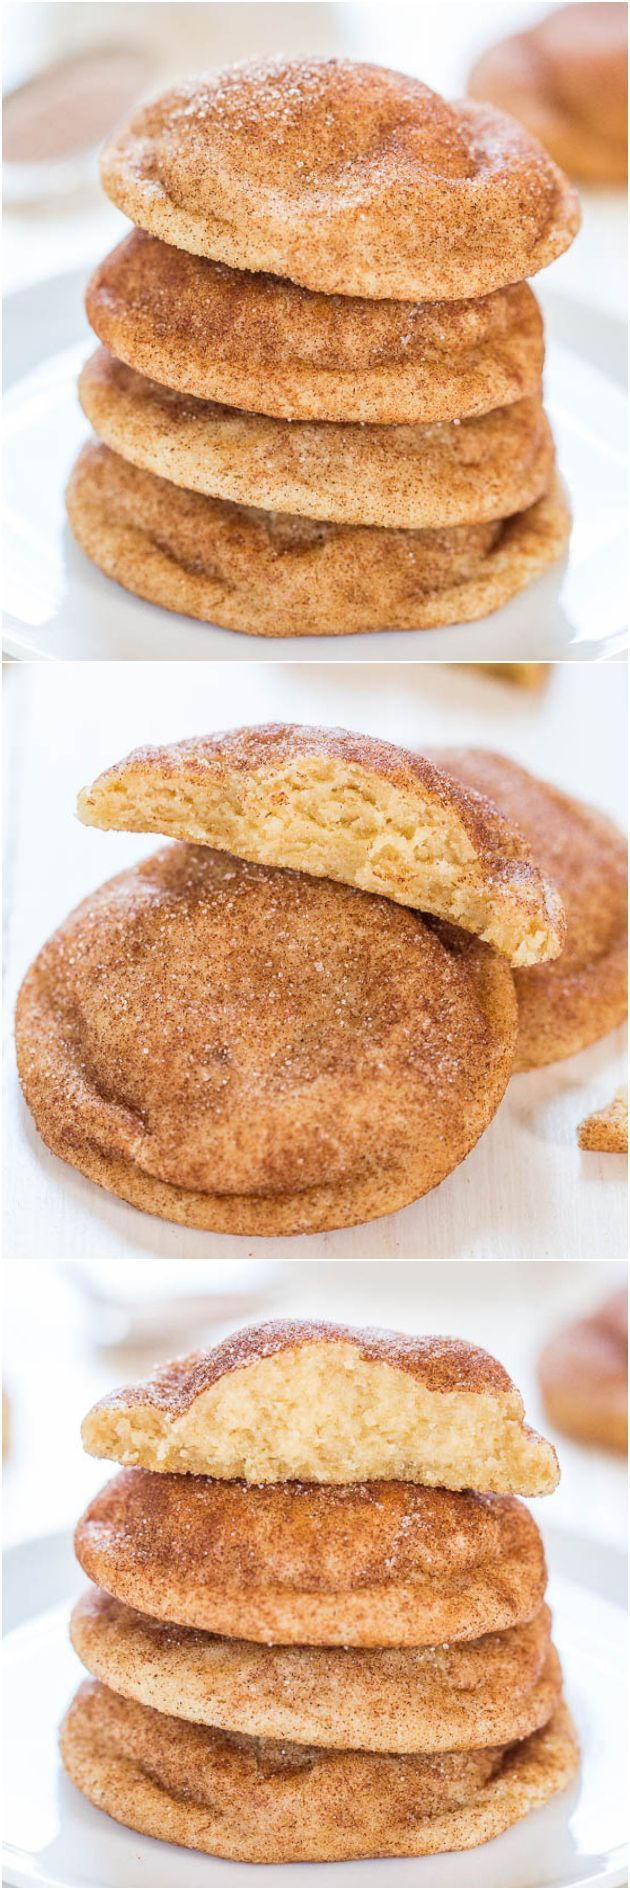 The Best Snickerdoodles – Soft, pillowy puffs that are so irresistible! The clos